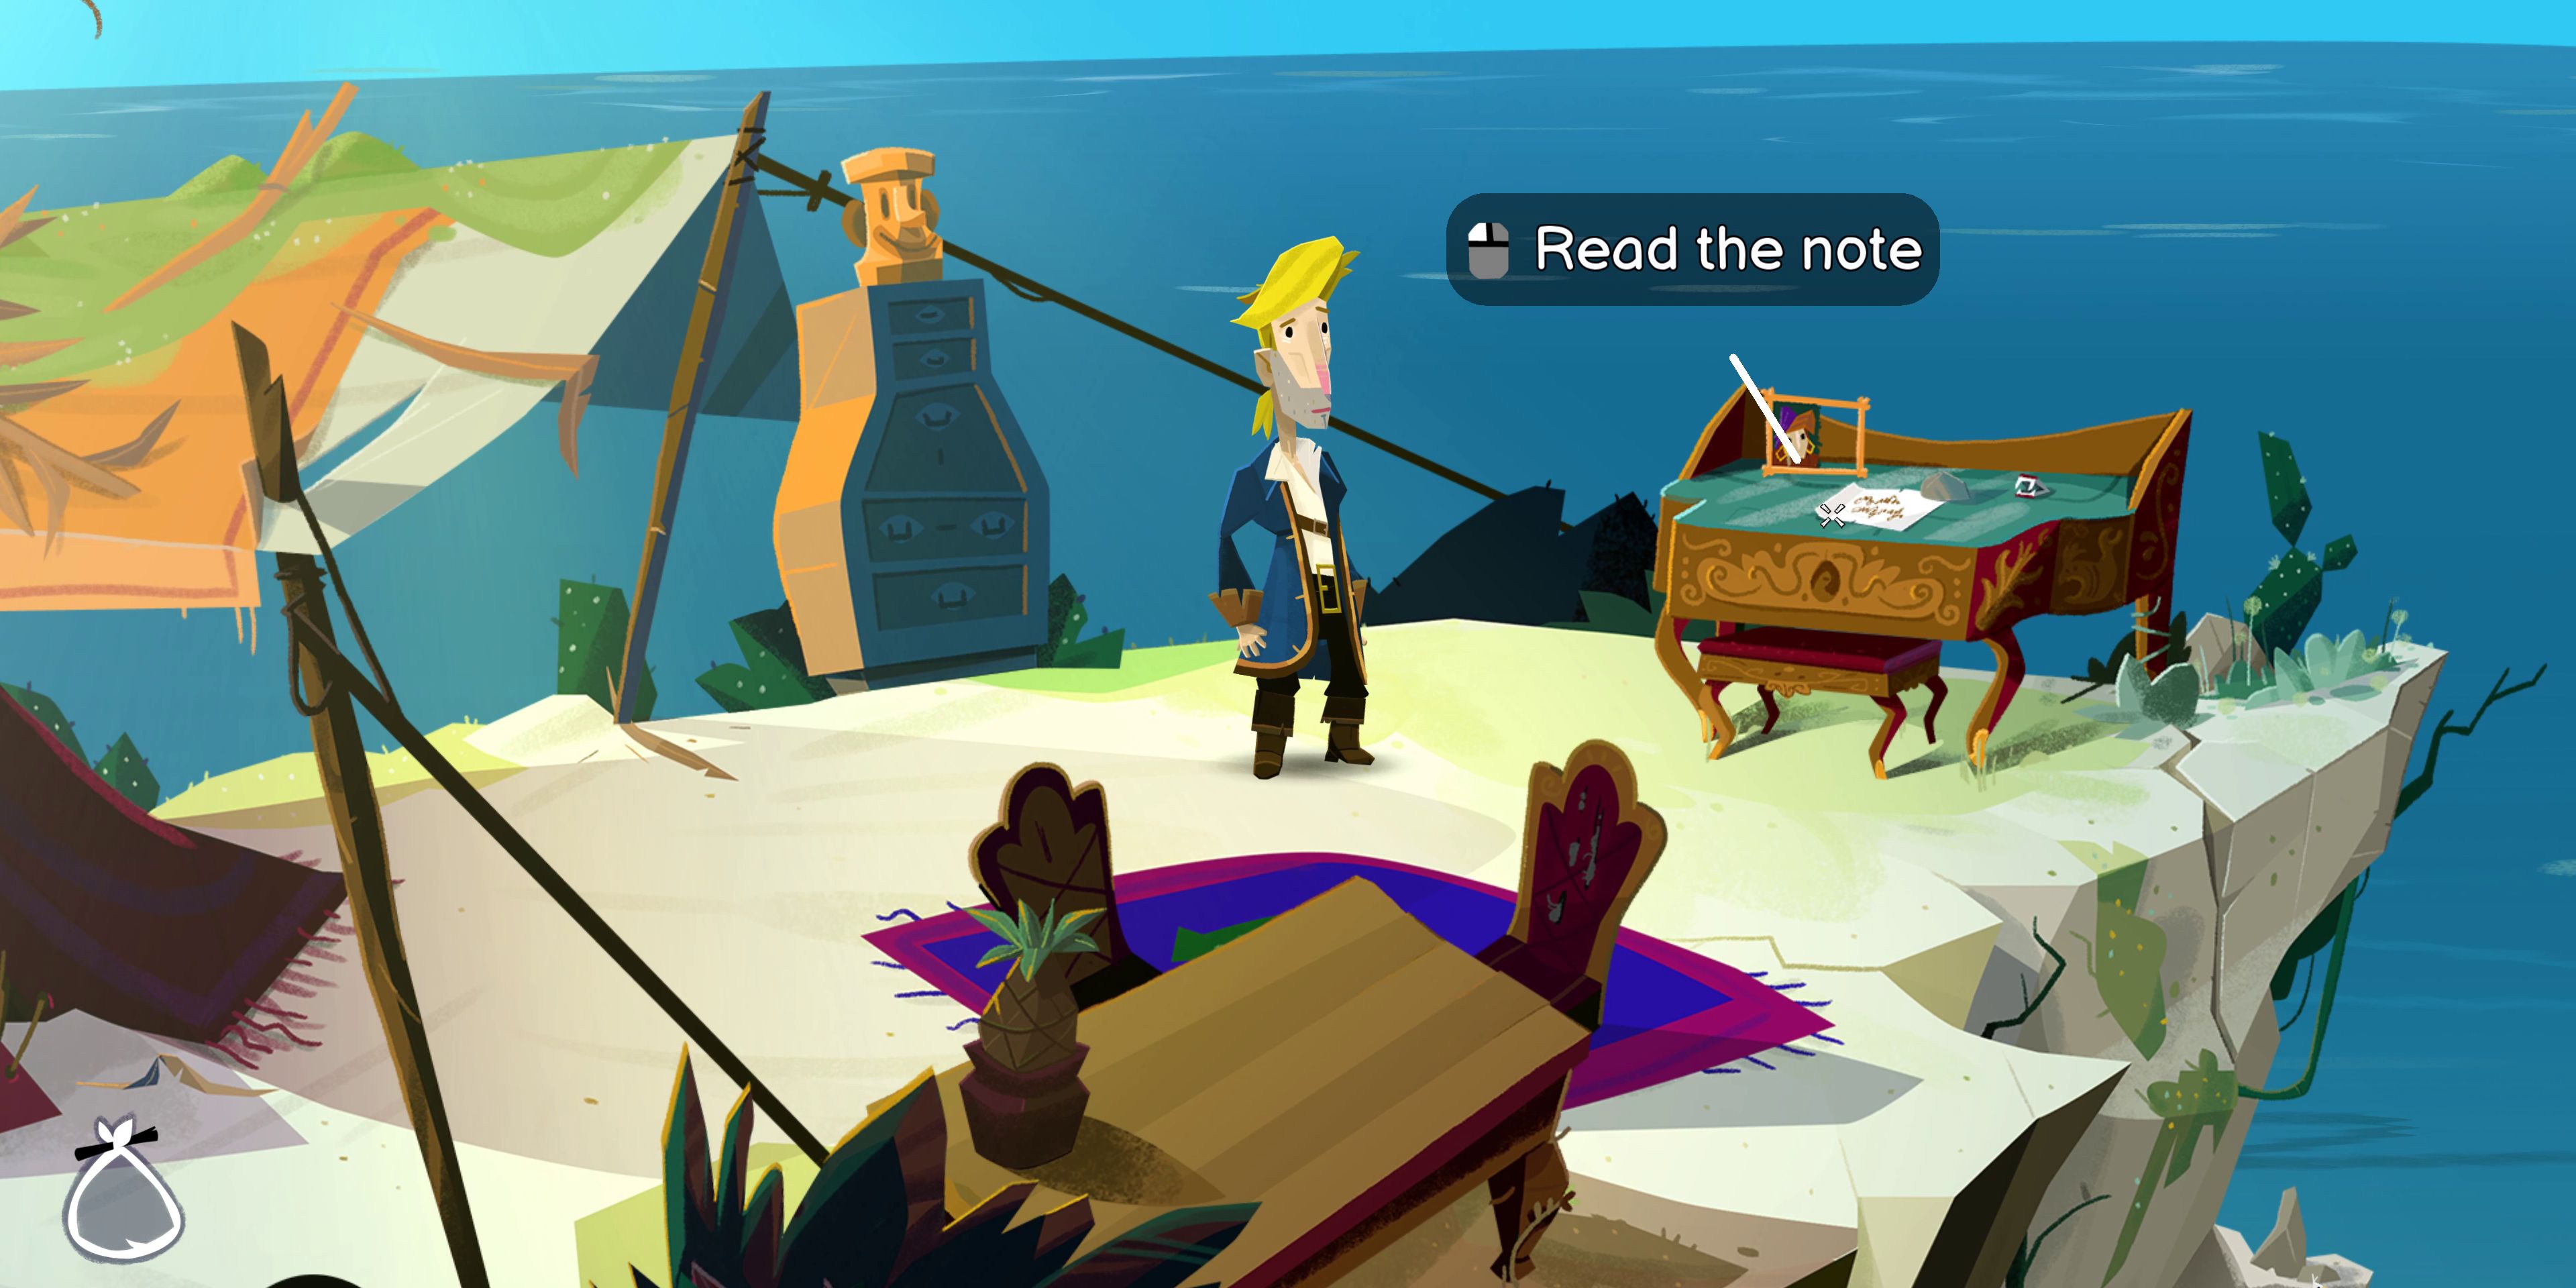 return-to-monkey-island-part-4-walkthrough-10-painting-and-note